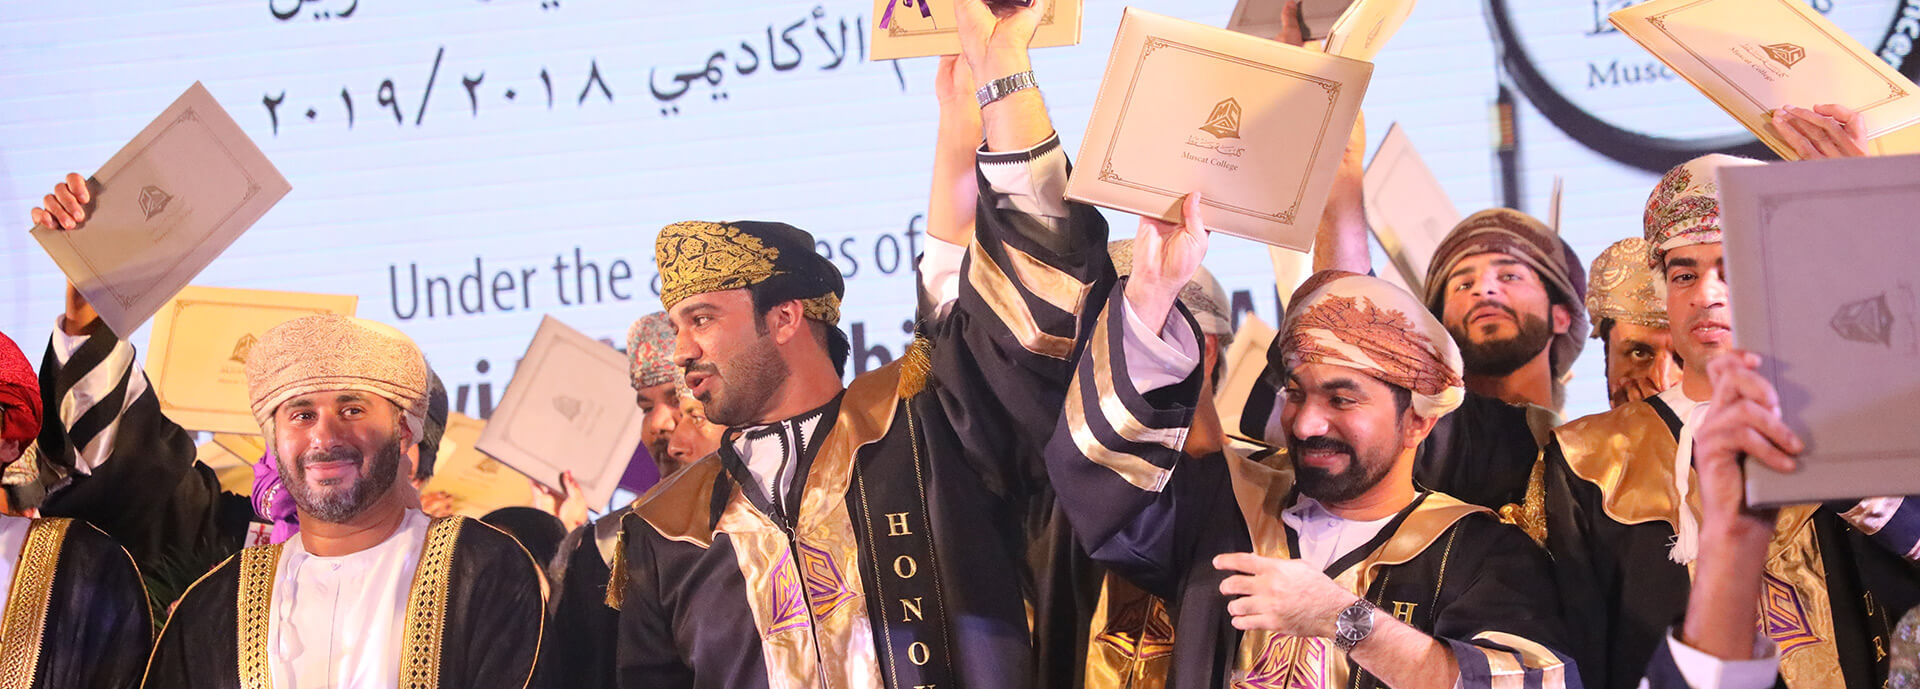 Students from Muscat celebrating graduation